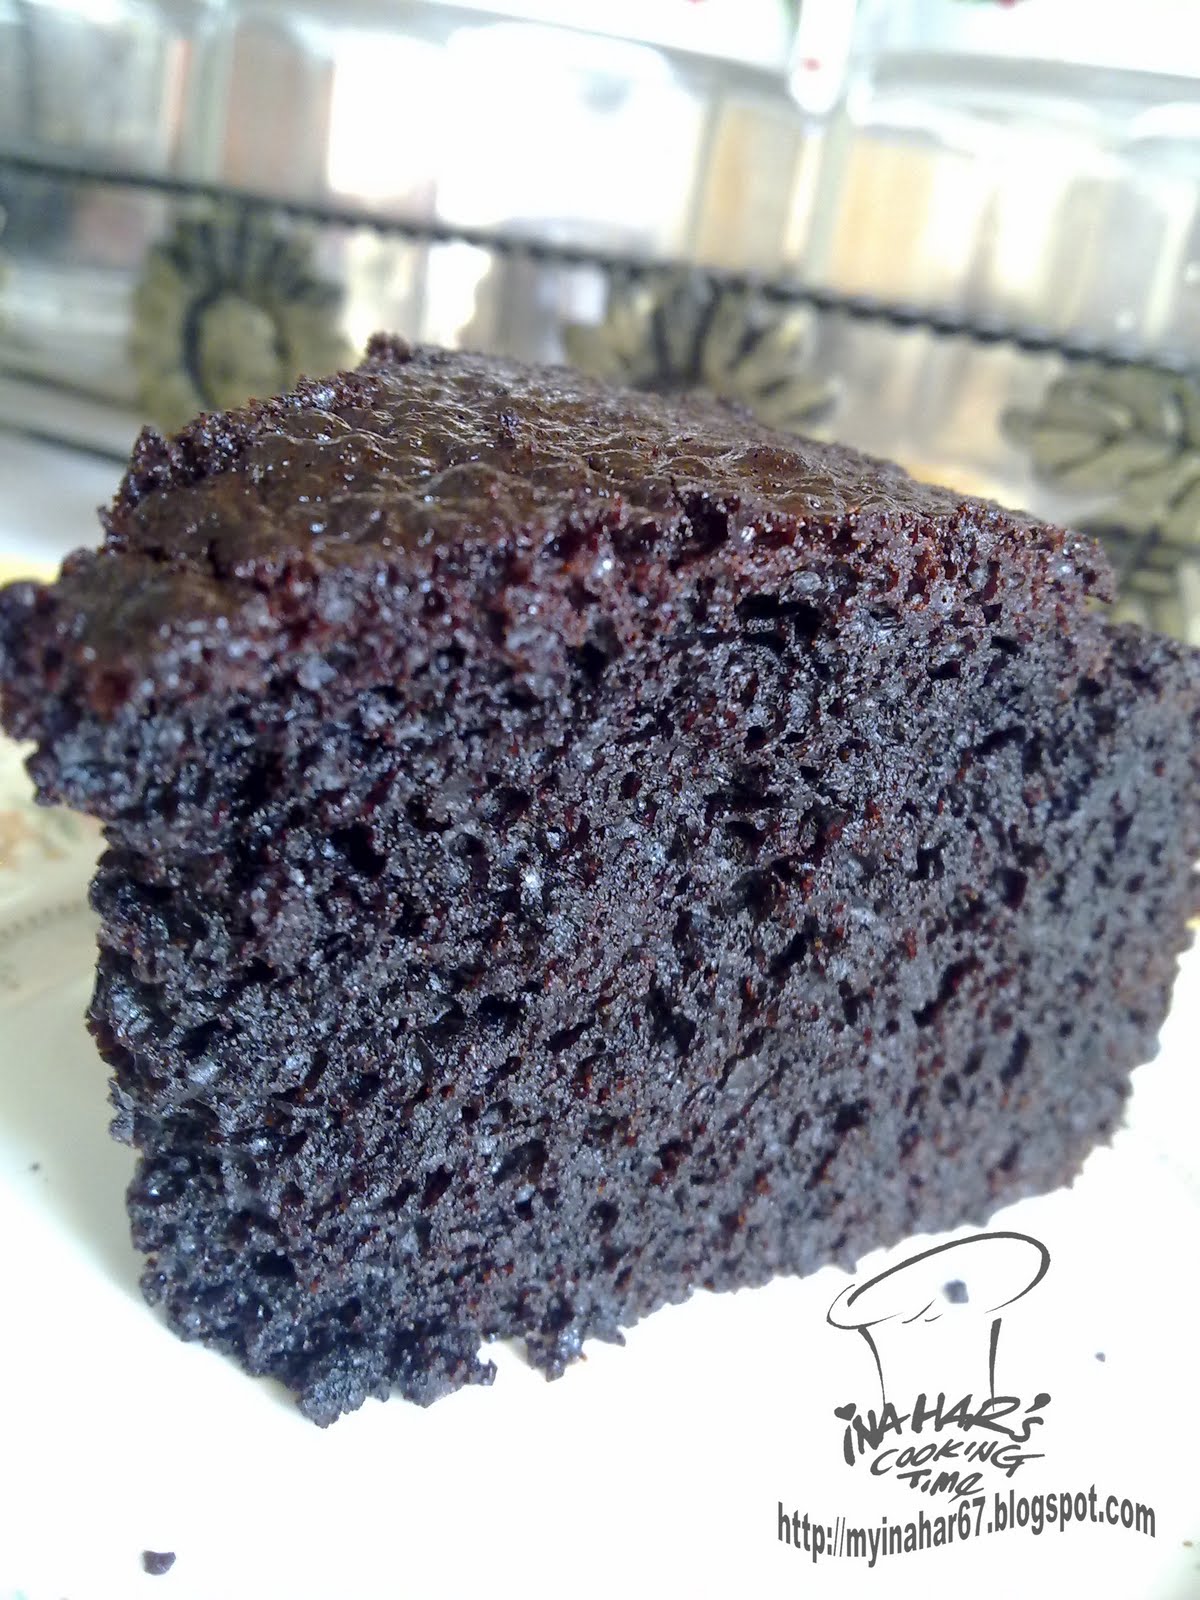 INAHAR'S COOKING TIME!: EGGLESS CHOCOLATE CAKE